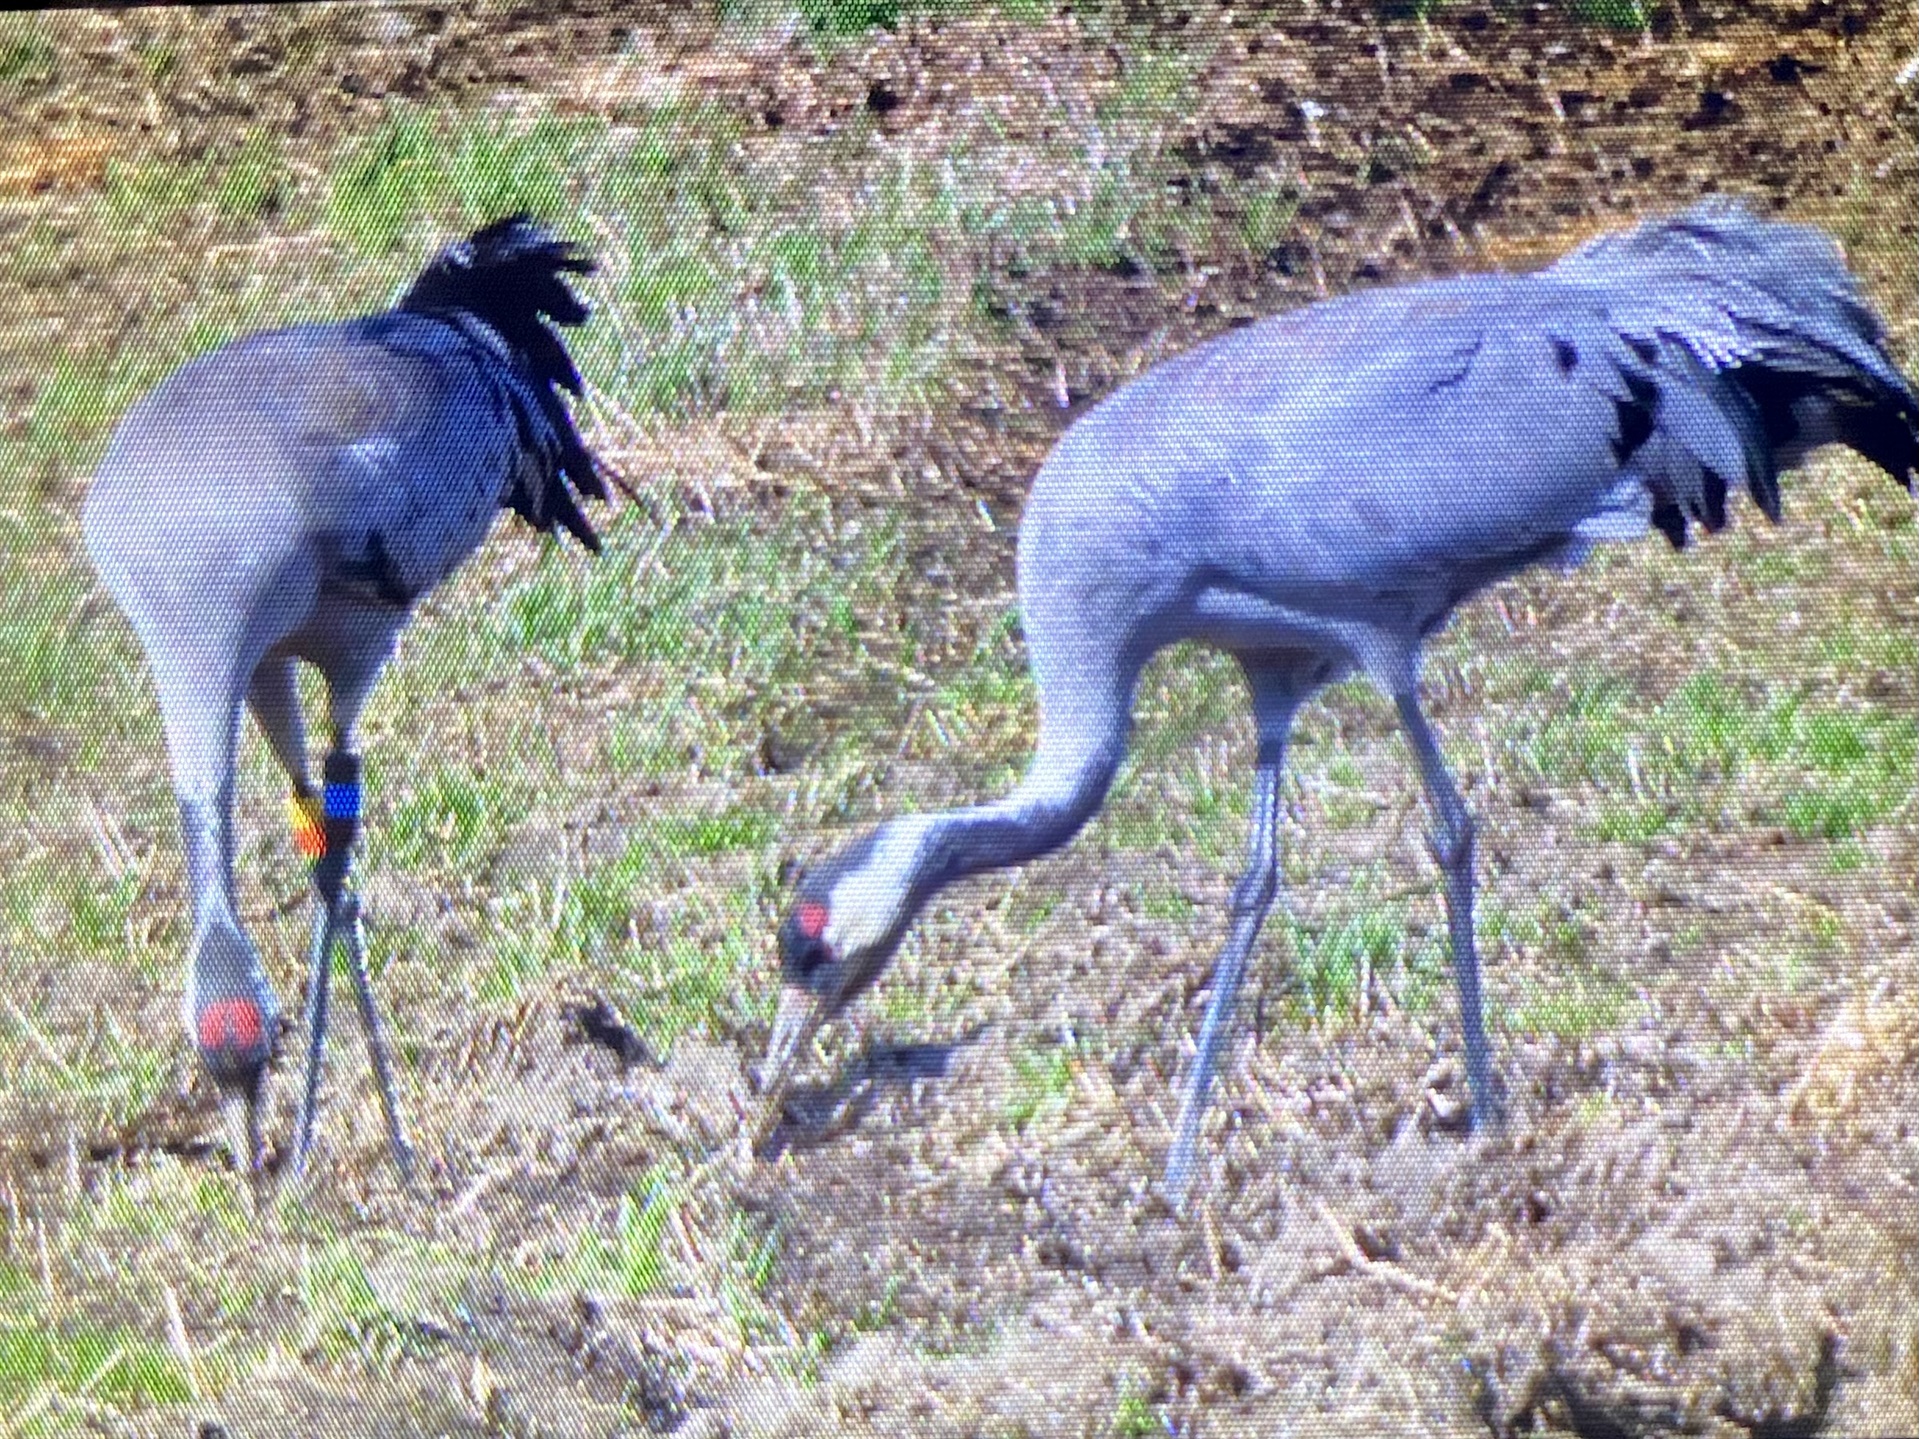 Two Cranes are feeding in a grassy field. They are tall, grey, long-legged birds with black faces and a red mark on their heads. The bird on the left has coloured rings on its legs.